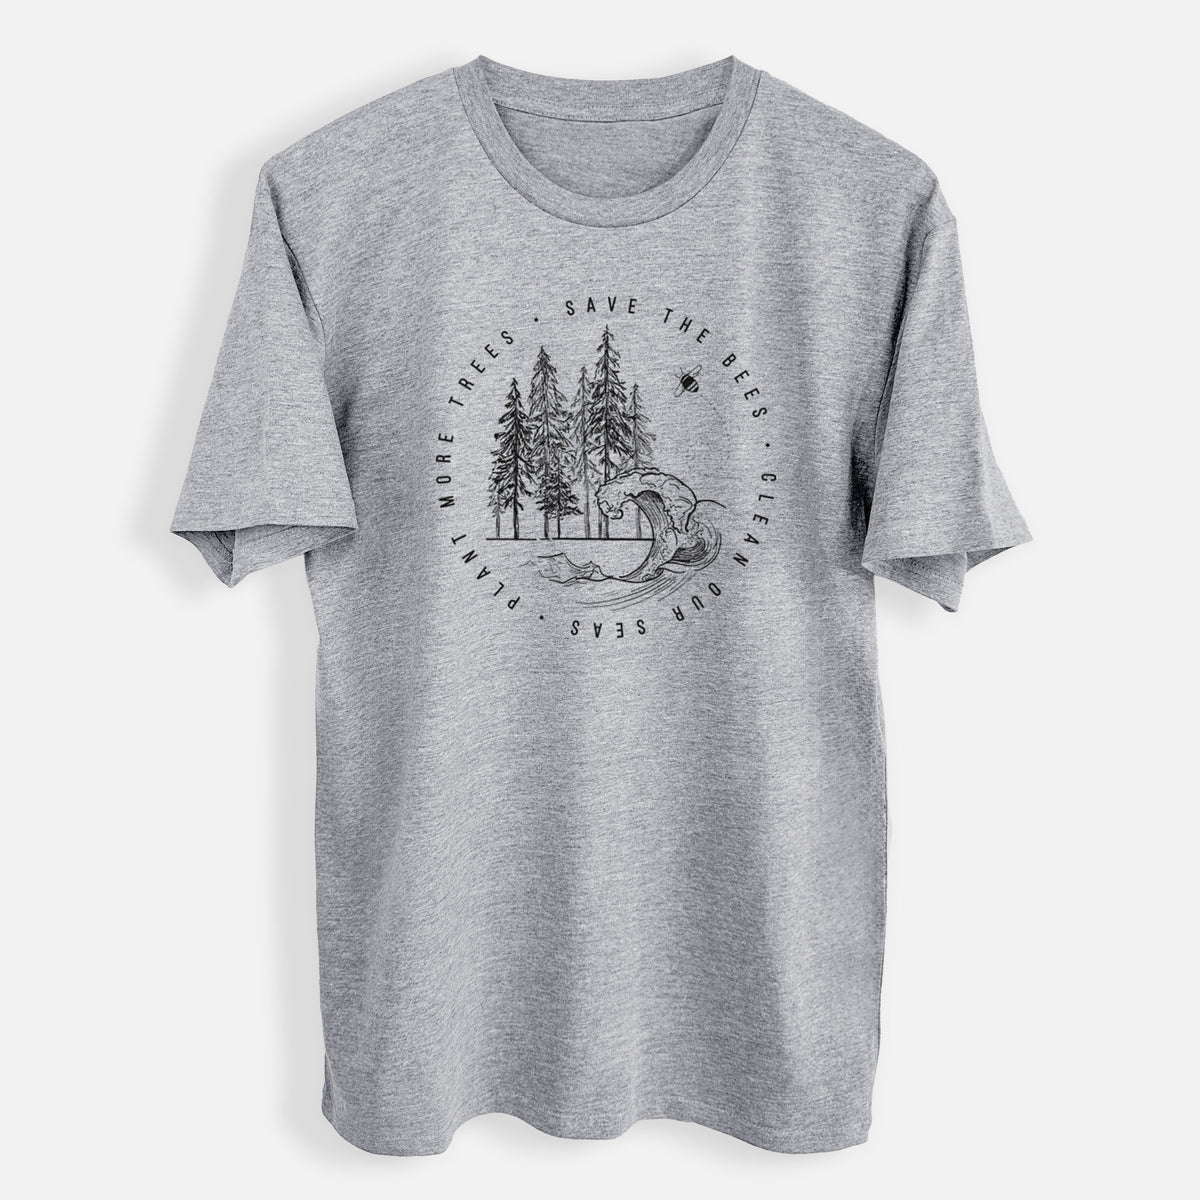 Save the Bees, Clean our Seas, Plant more Trees - Mens Everyday Staple Tee